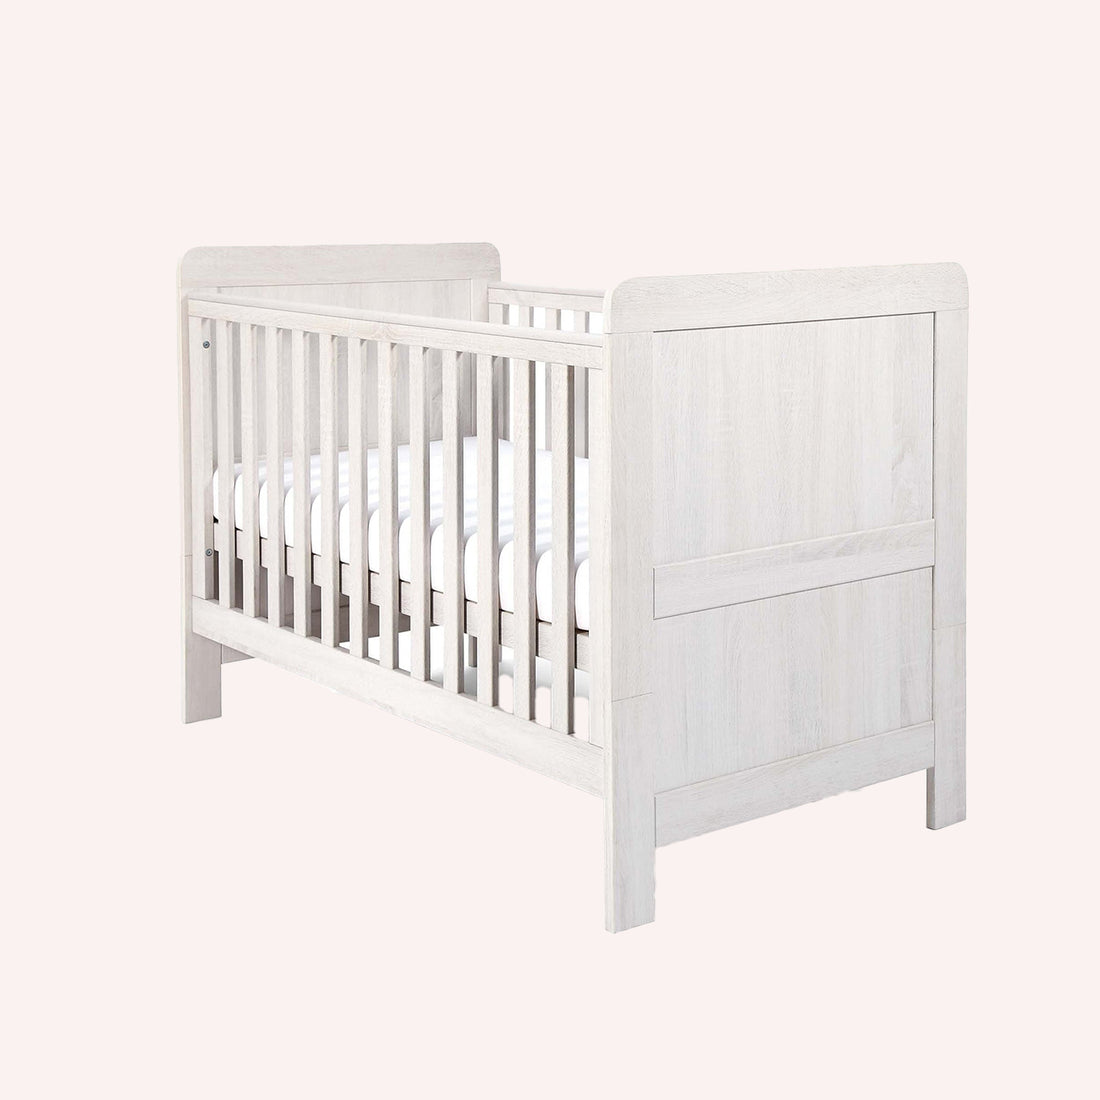 Atlas Cot Bed - White